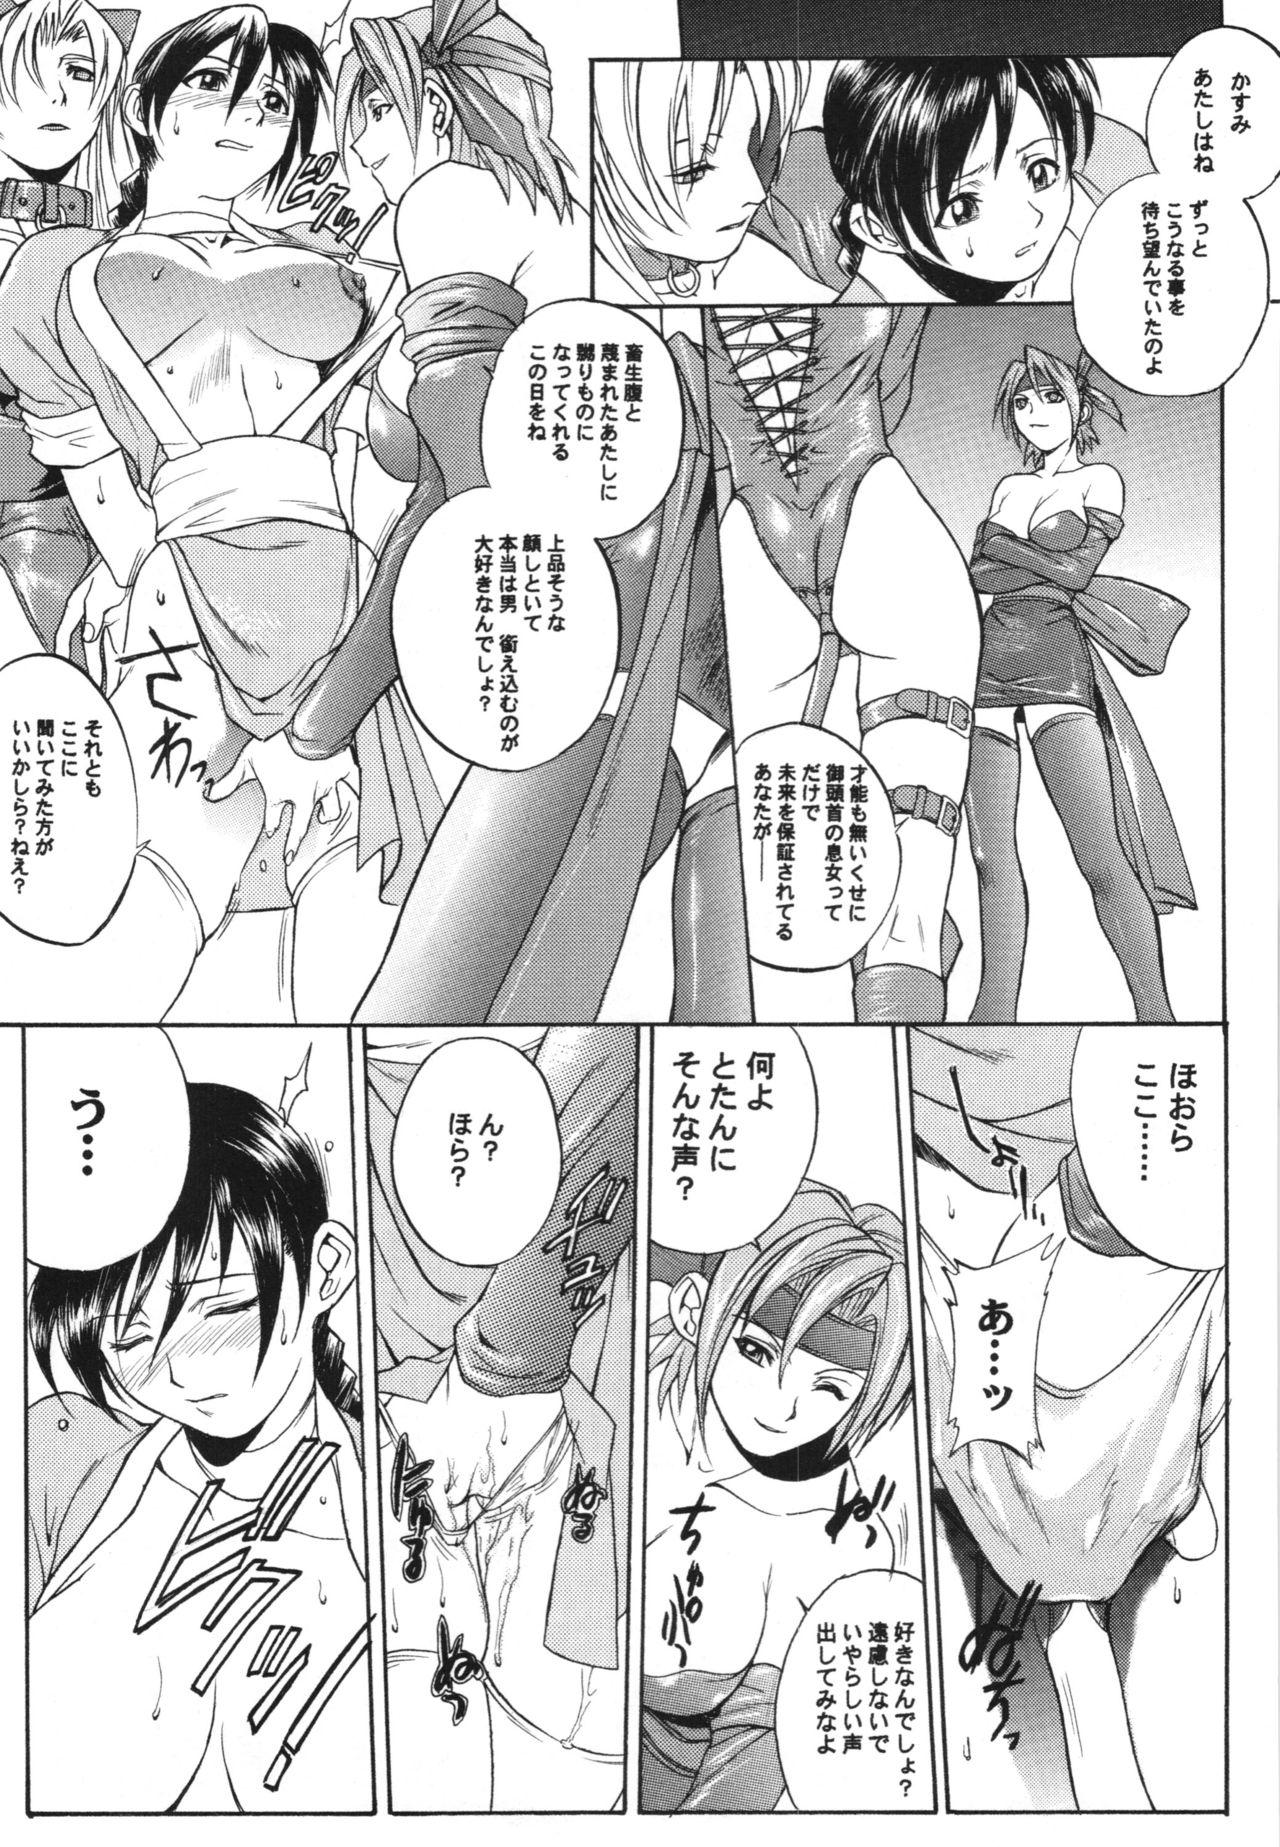 Couples WAY OF TEX-MEX Soushuuhen 3 + Omakebon - Dead or alive To heart Xenosaga Step Dad - Page 11